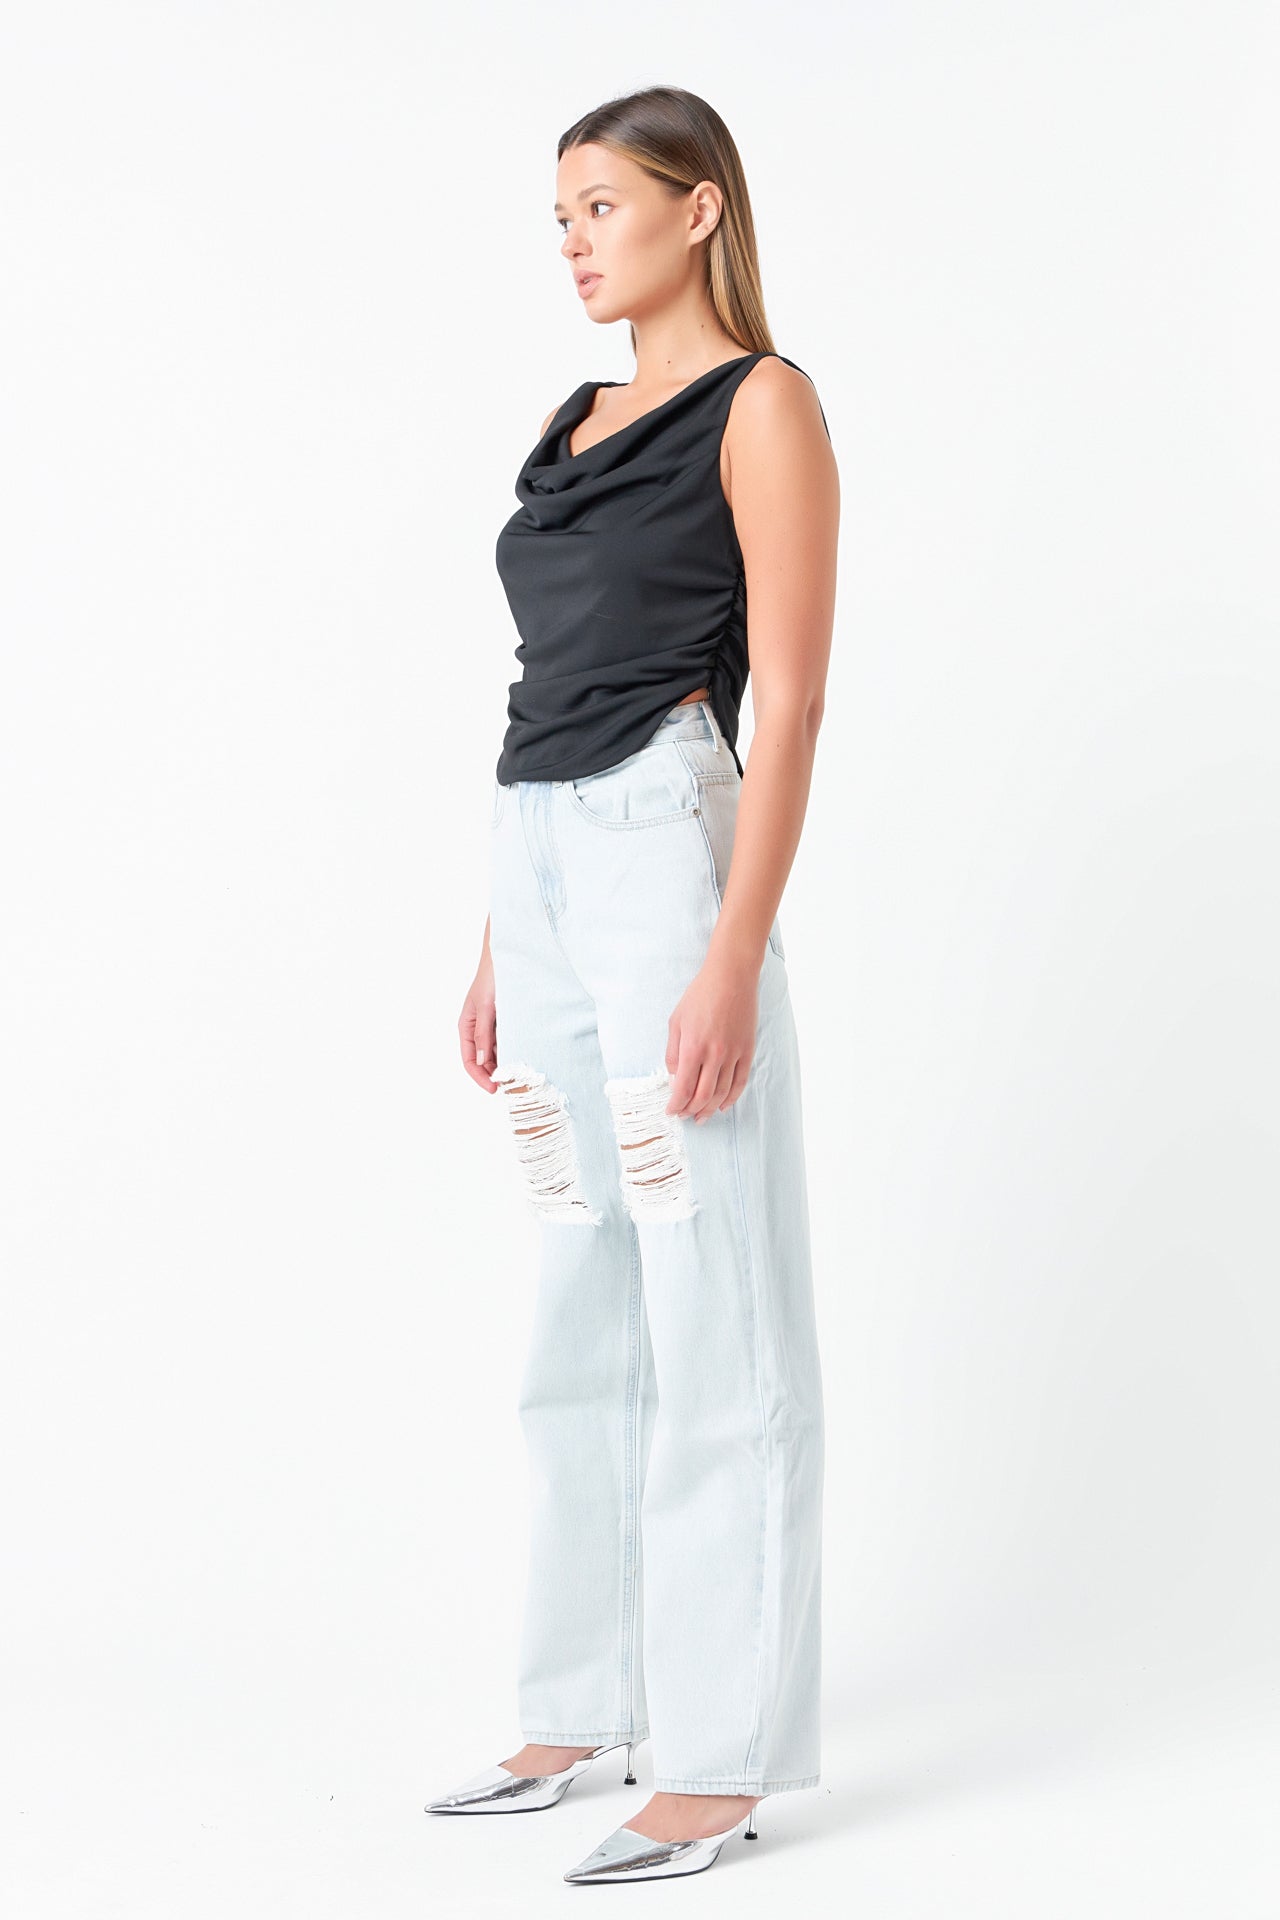 GREY LAB - Cowl Neck Ruched Top - TOPS available at Objectrare